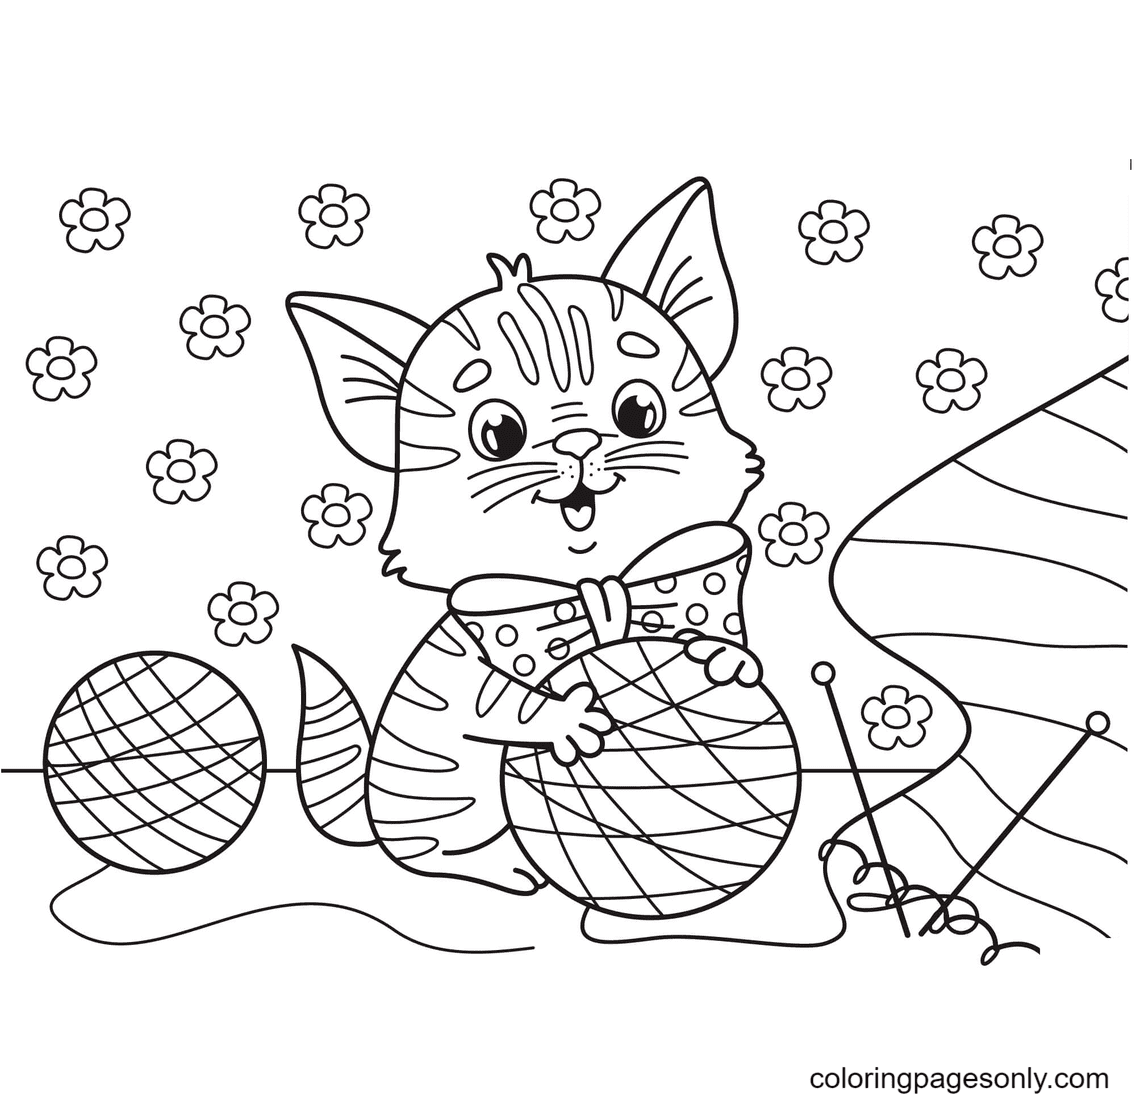 Kitten Hugs a Ball of Yarn Coloring Page